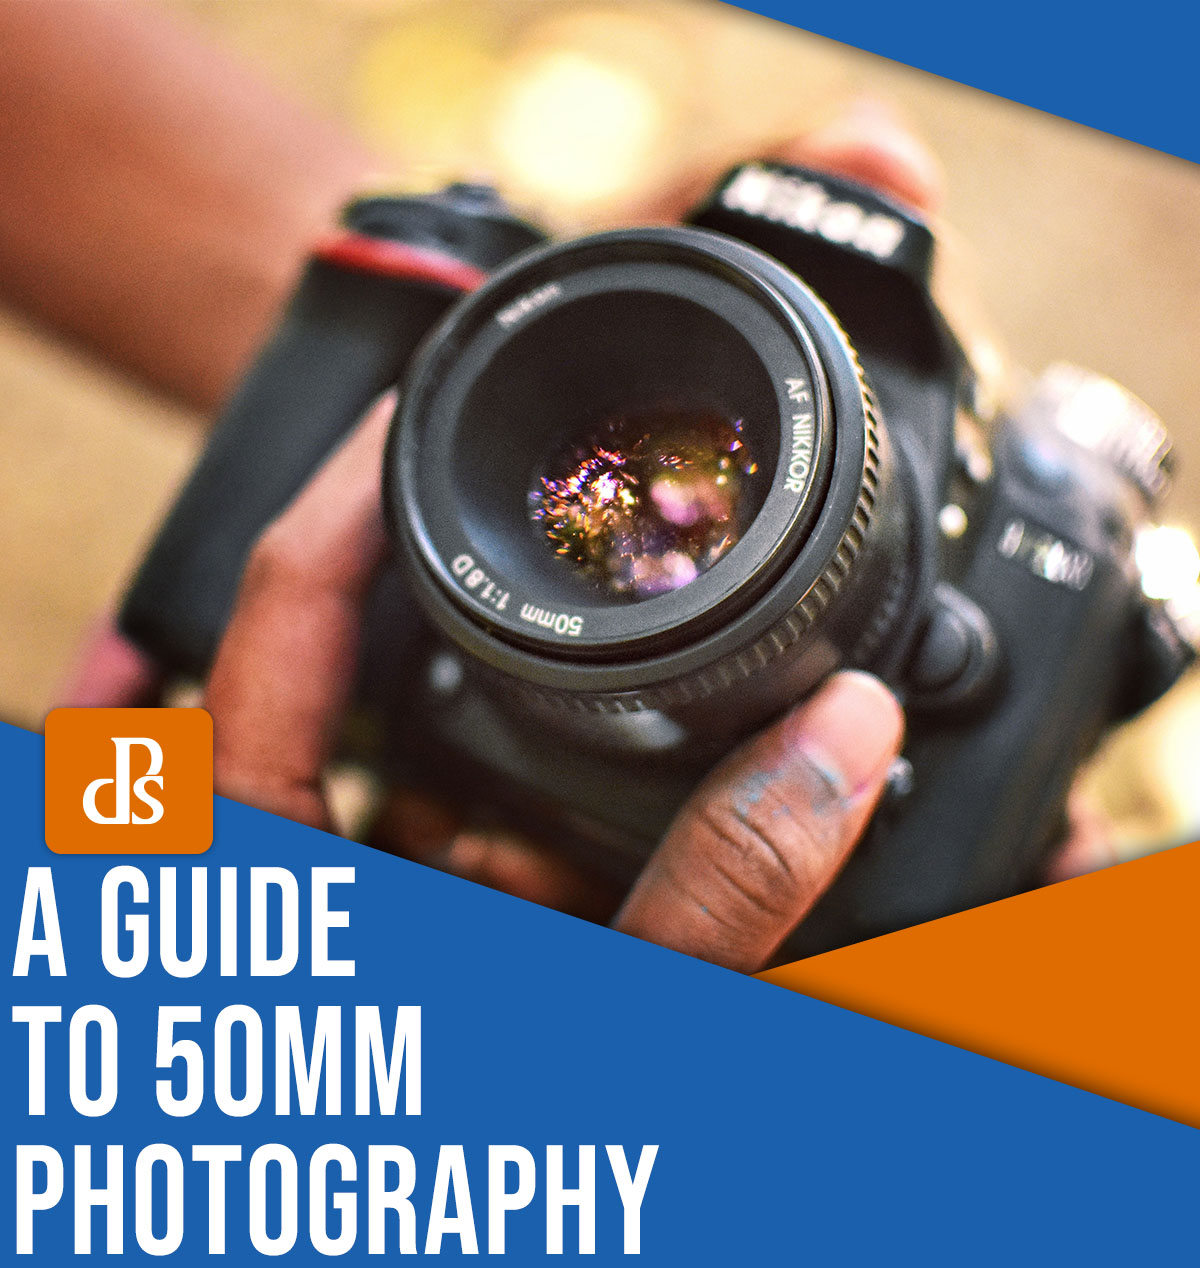 A guide to 50mm photography